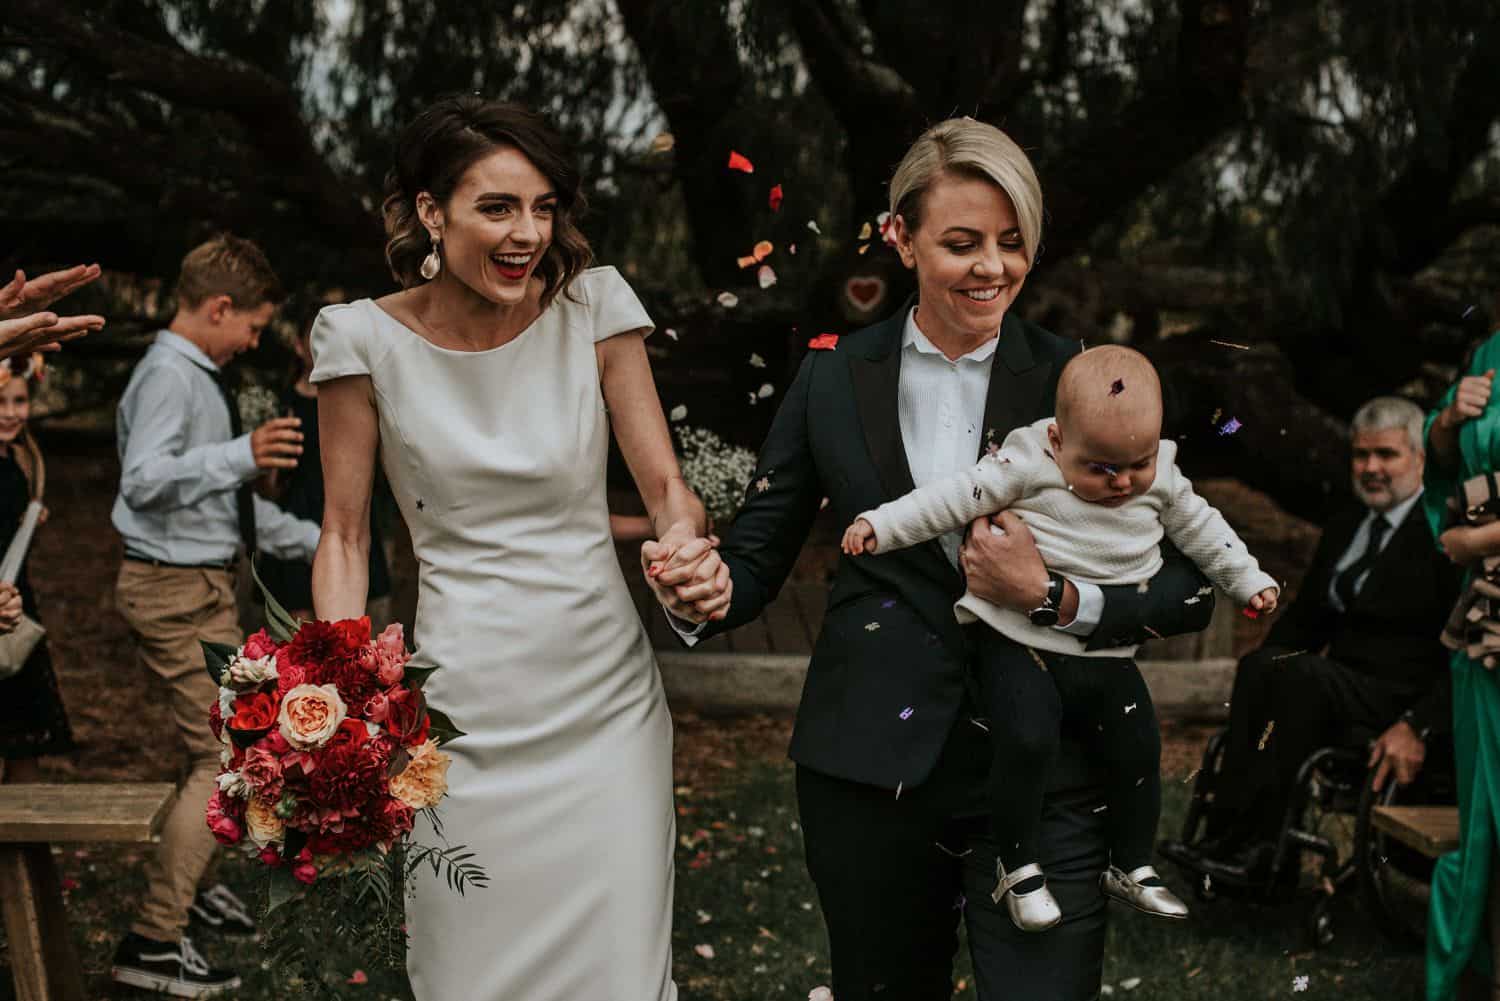 Two brides walk up the aisle with their baby amid a shower of rose petals